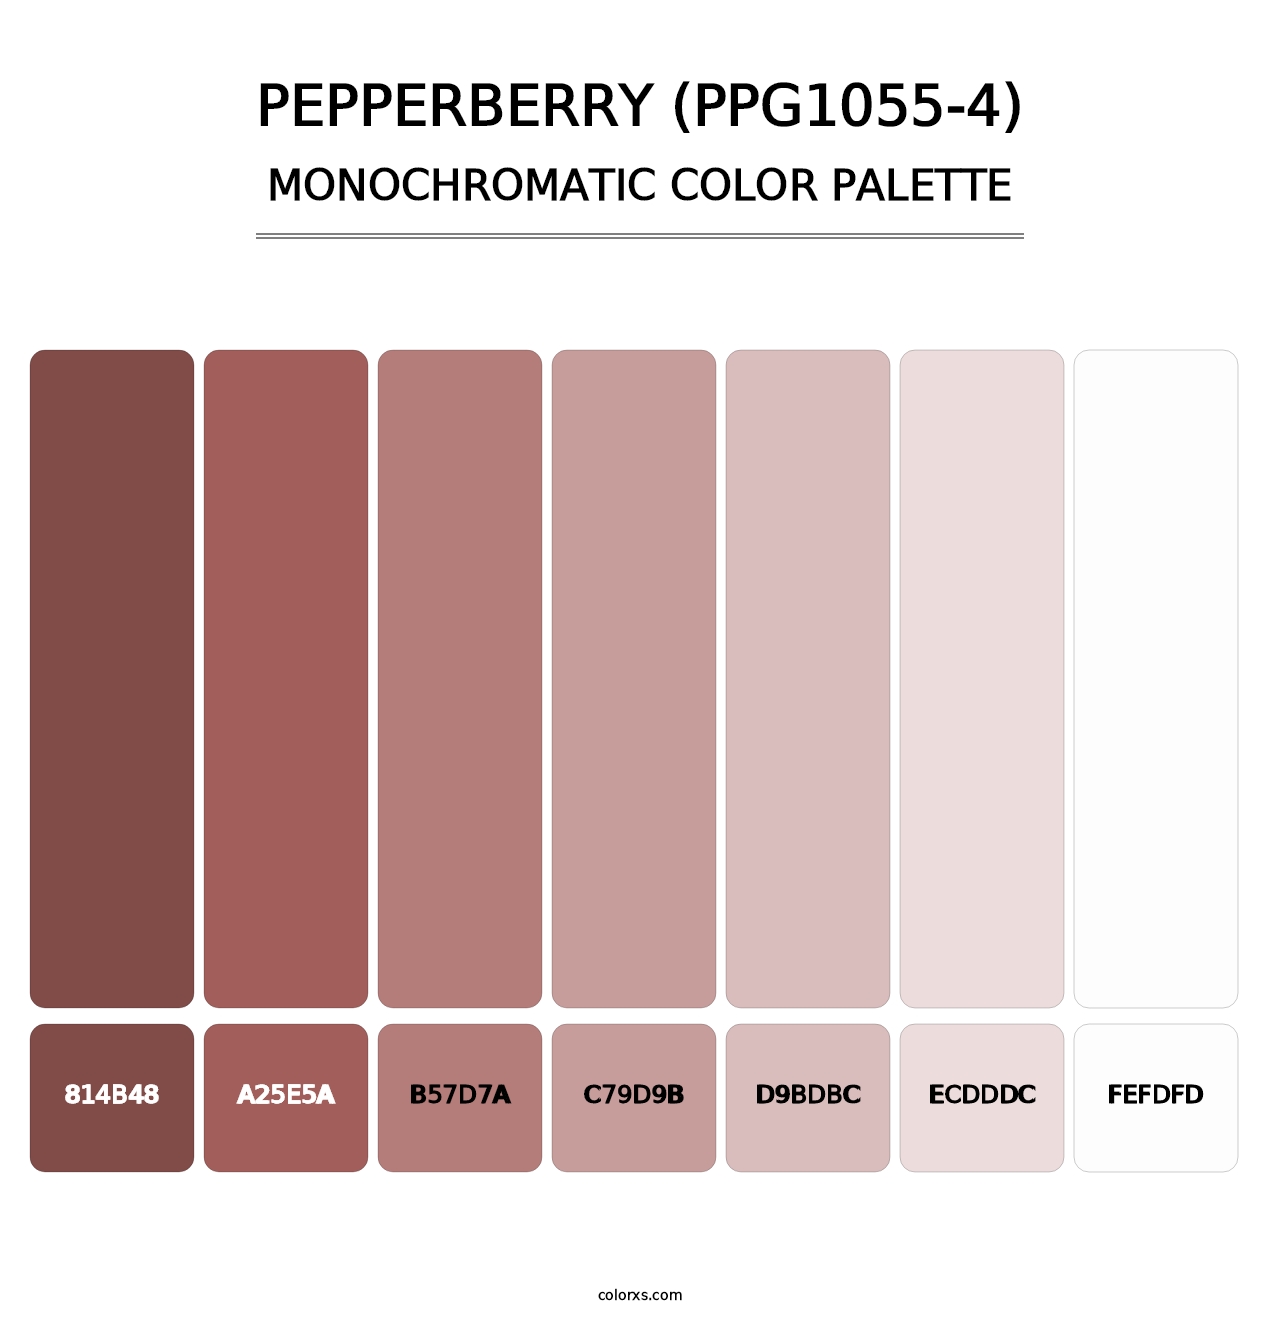 Pepperberry (PPG1055-4) - Monochromatic Color Palette